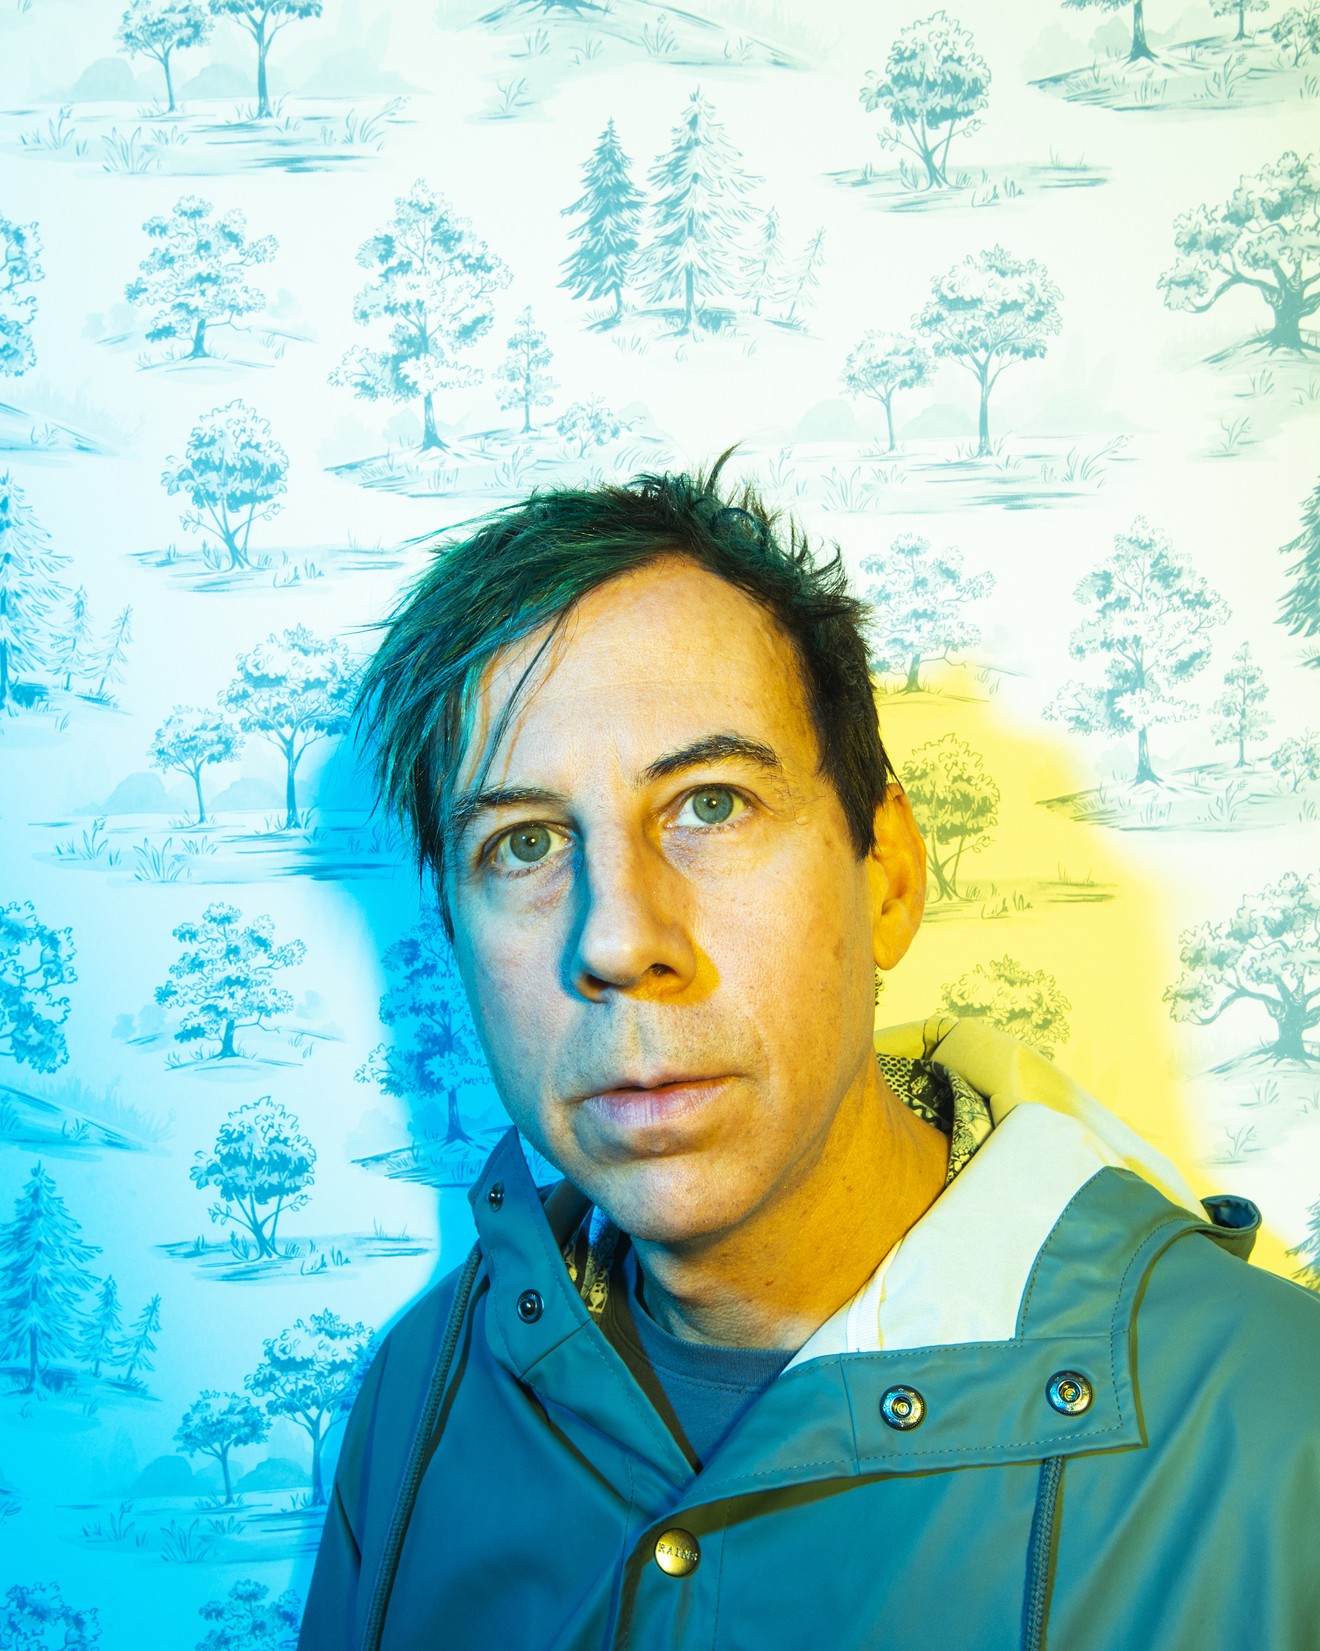 John Vanderslice performs at Valley Bar on April 17. Come say hello.